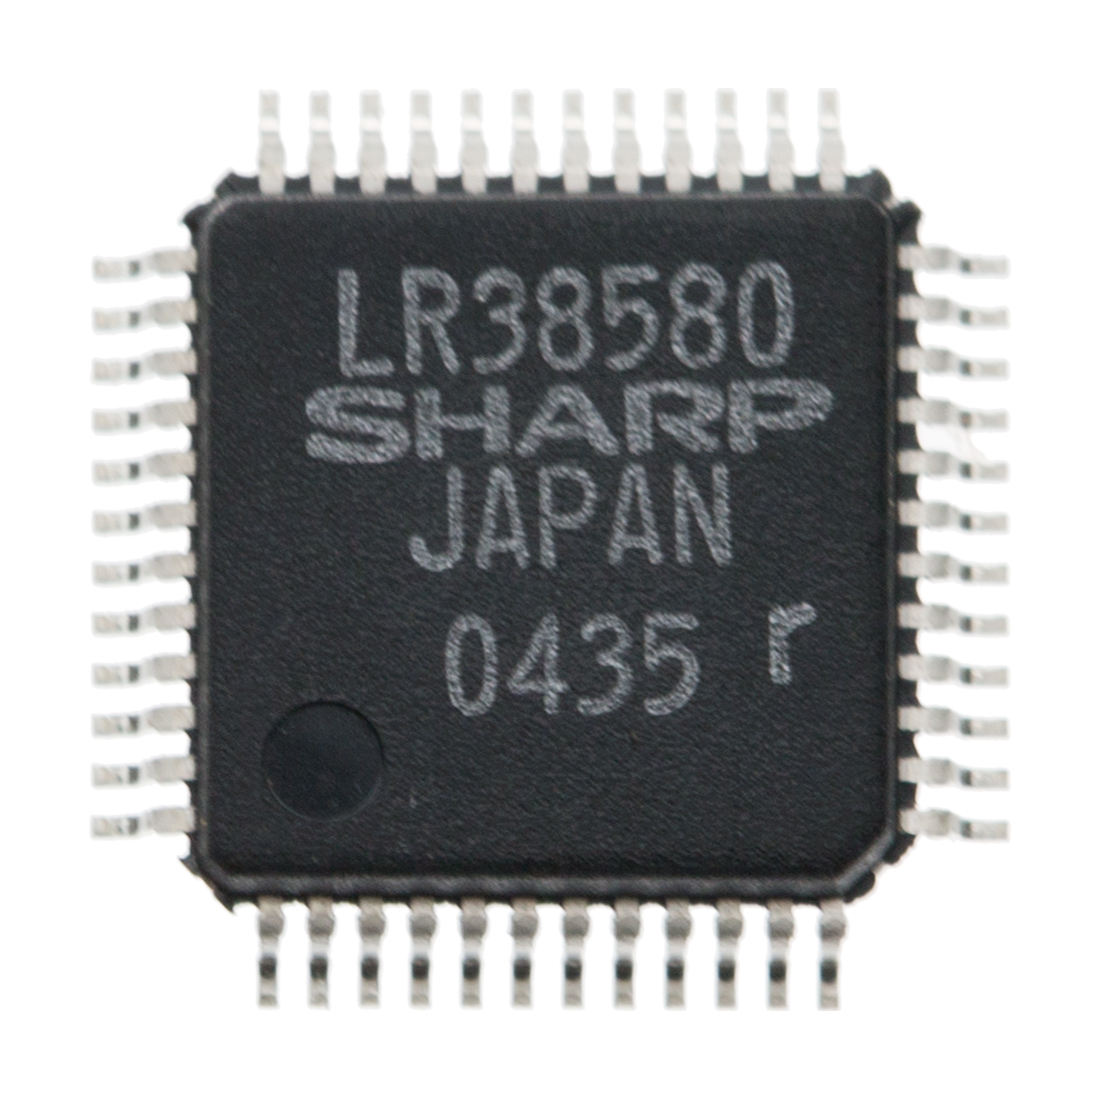 SHARP Black and white CCD driver MCU, Sharp ccd driver IC, black and white CCD driver IC, LR38580 original stock, normal image and mirror can be switched, ElA and CCIR mode switch